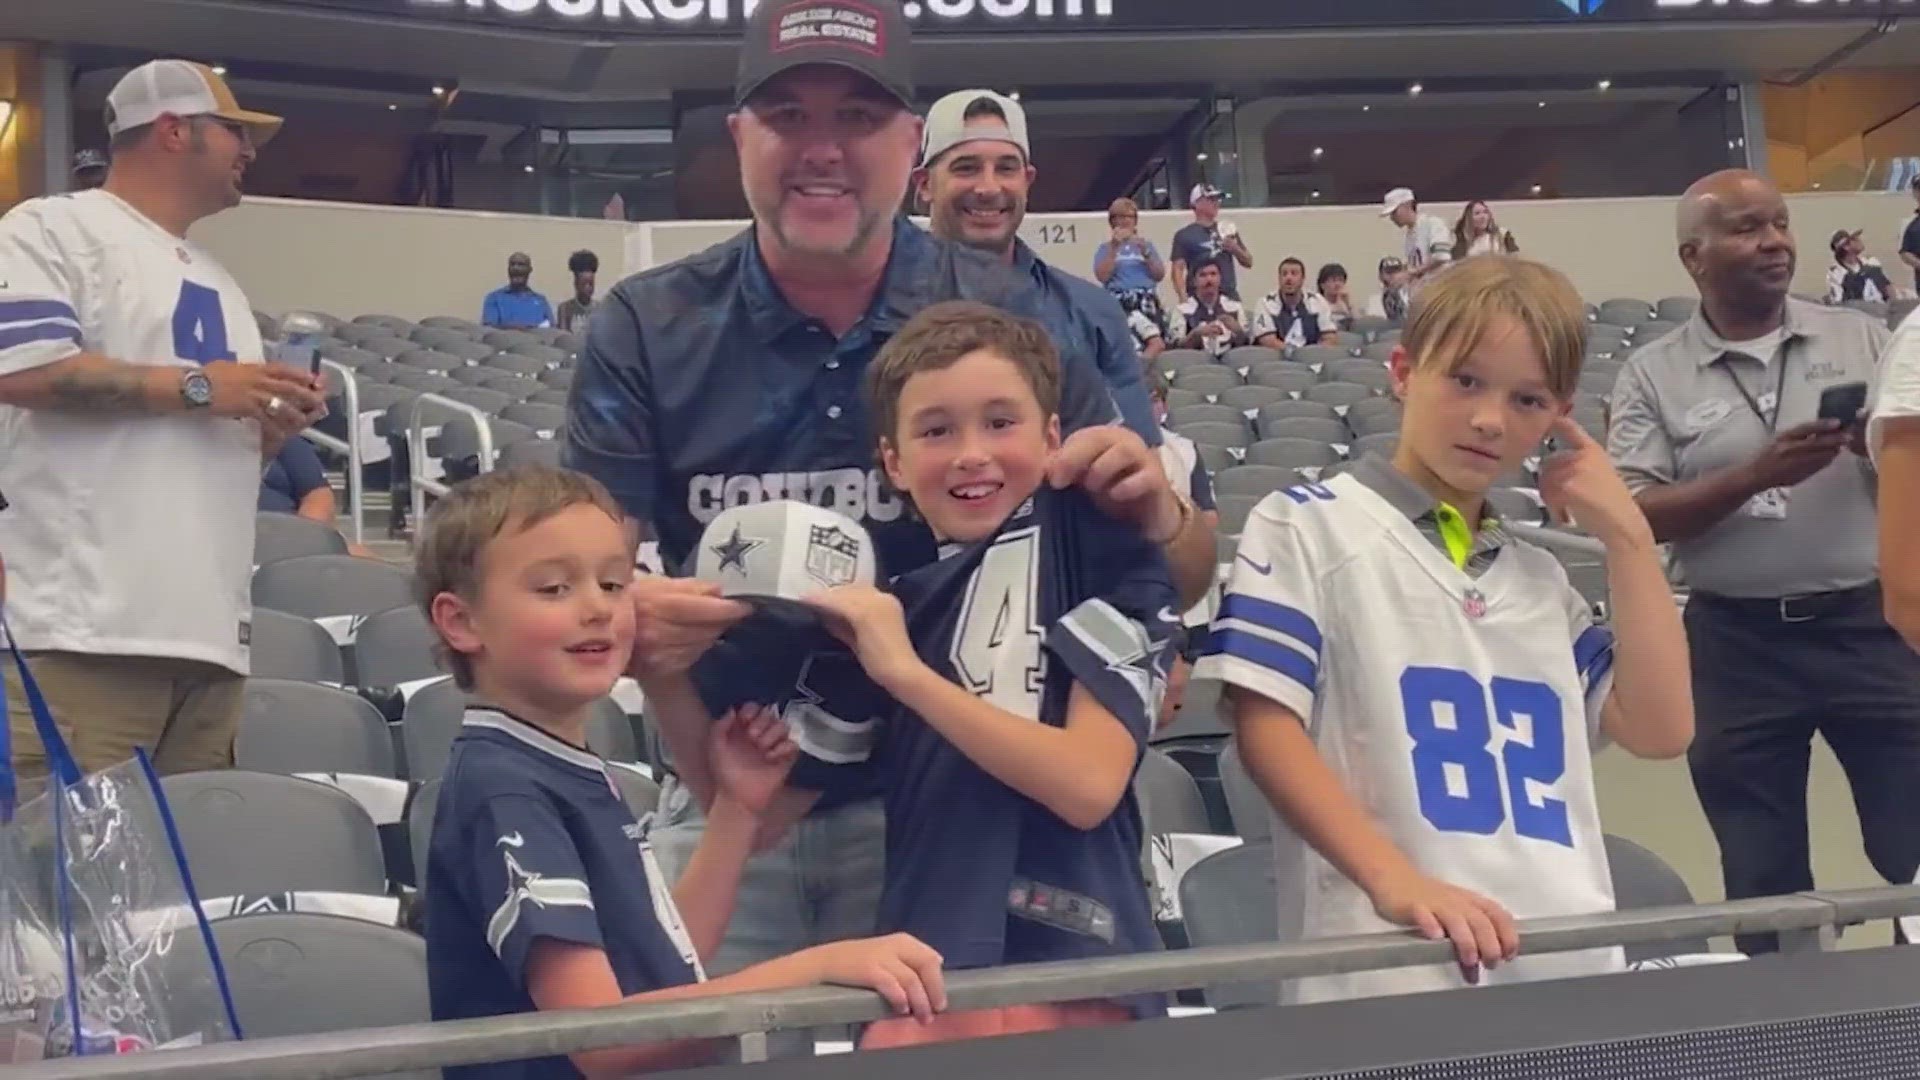 Prescott tossed his hat to a little boy as he ran off the field pregame, before the Cowboys home opener against the Jets.